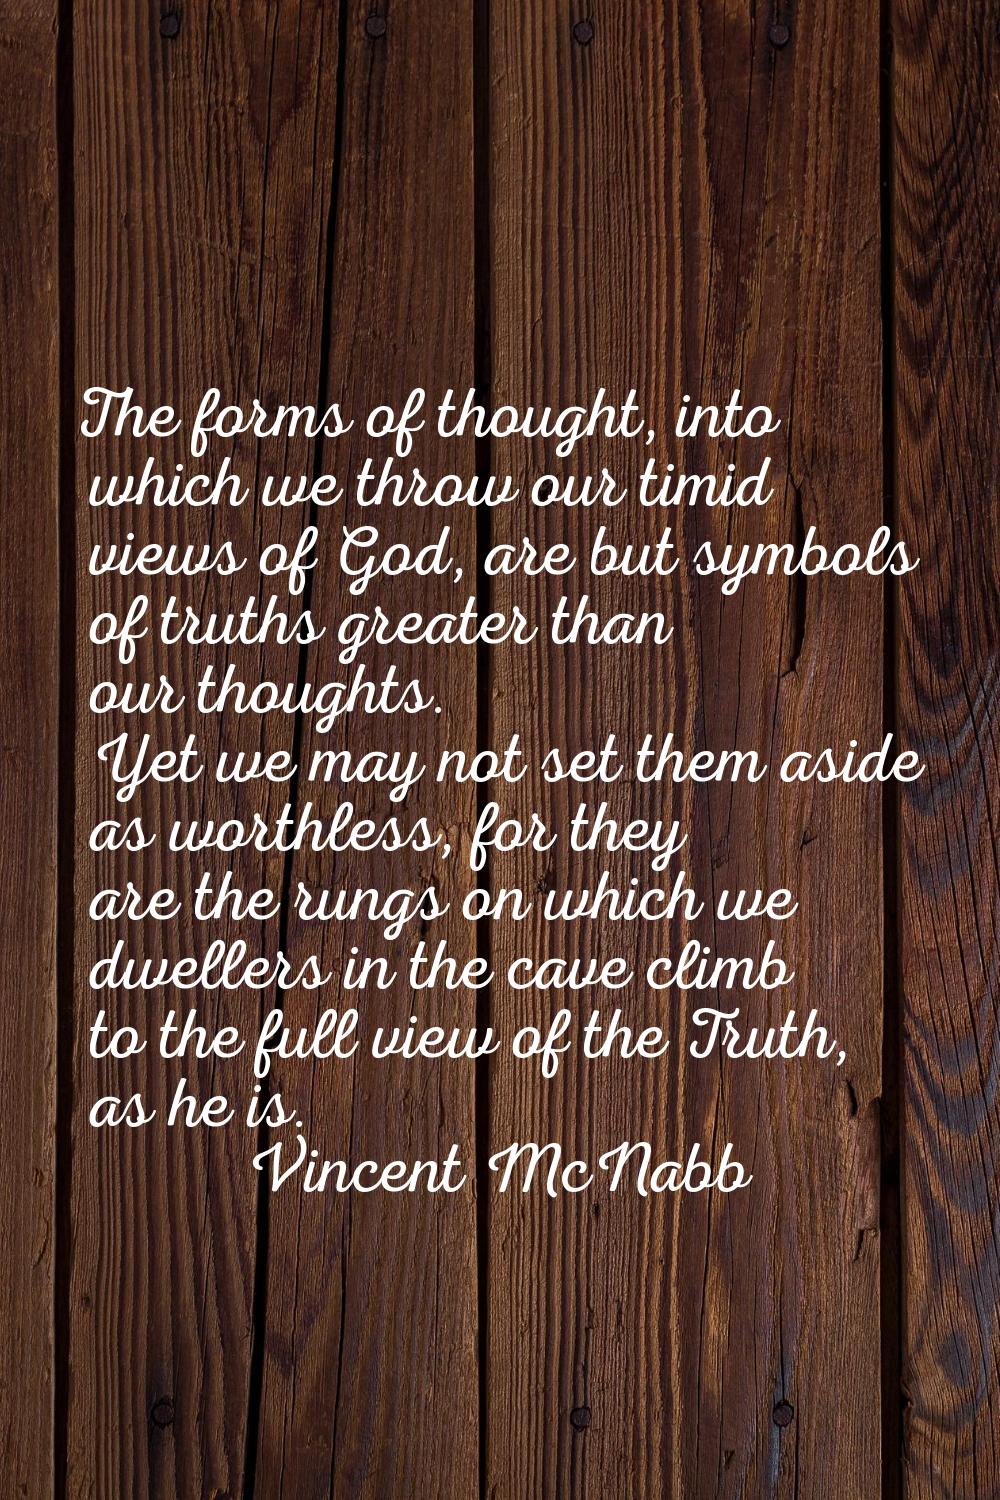 The forms of thought, into which we throw our timid views of God, are but symbols of truths greater